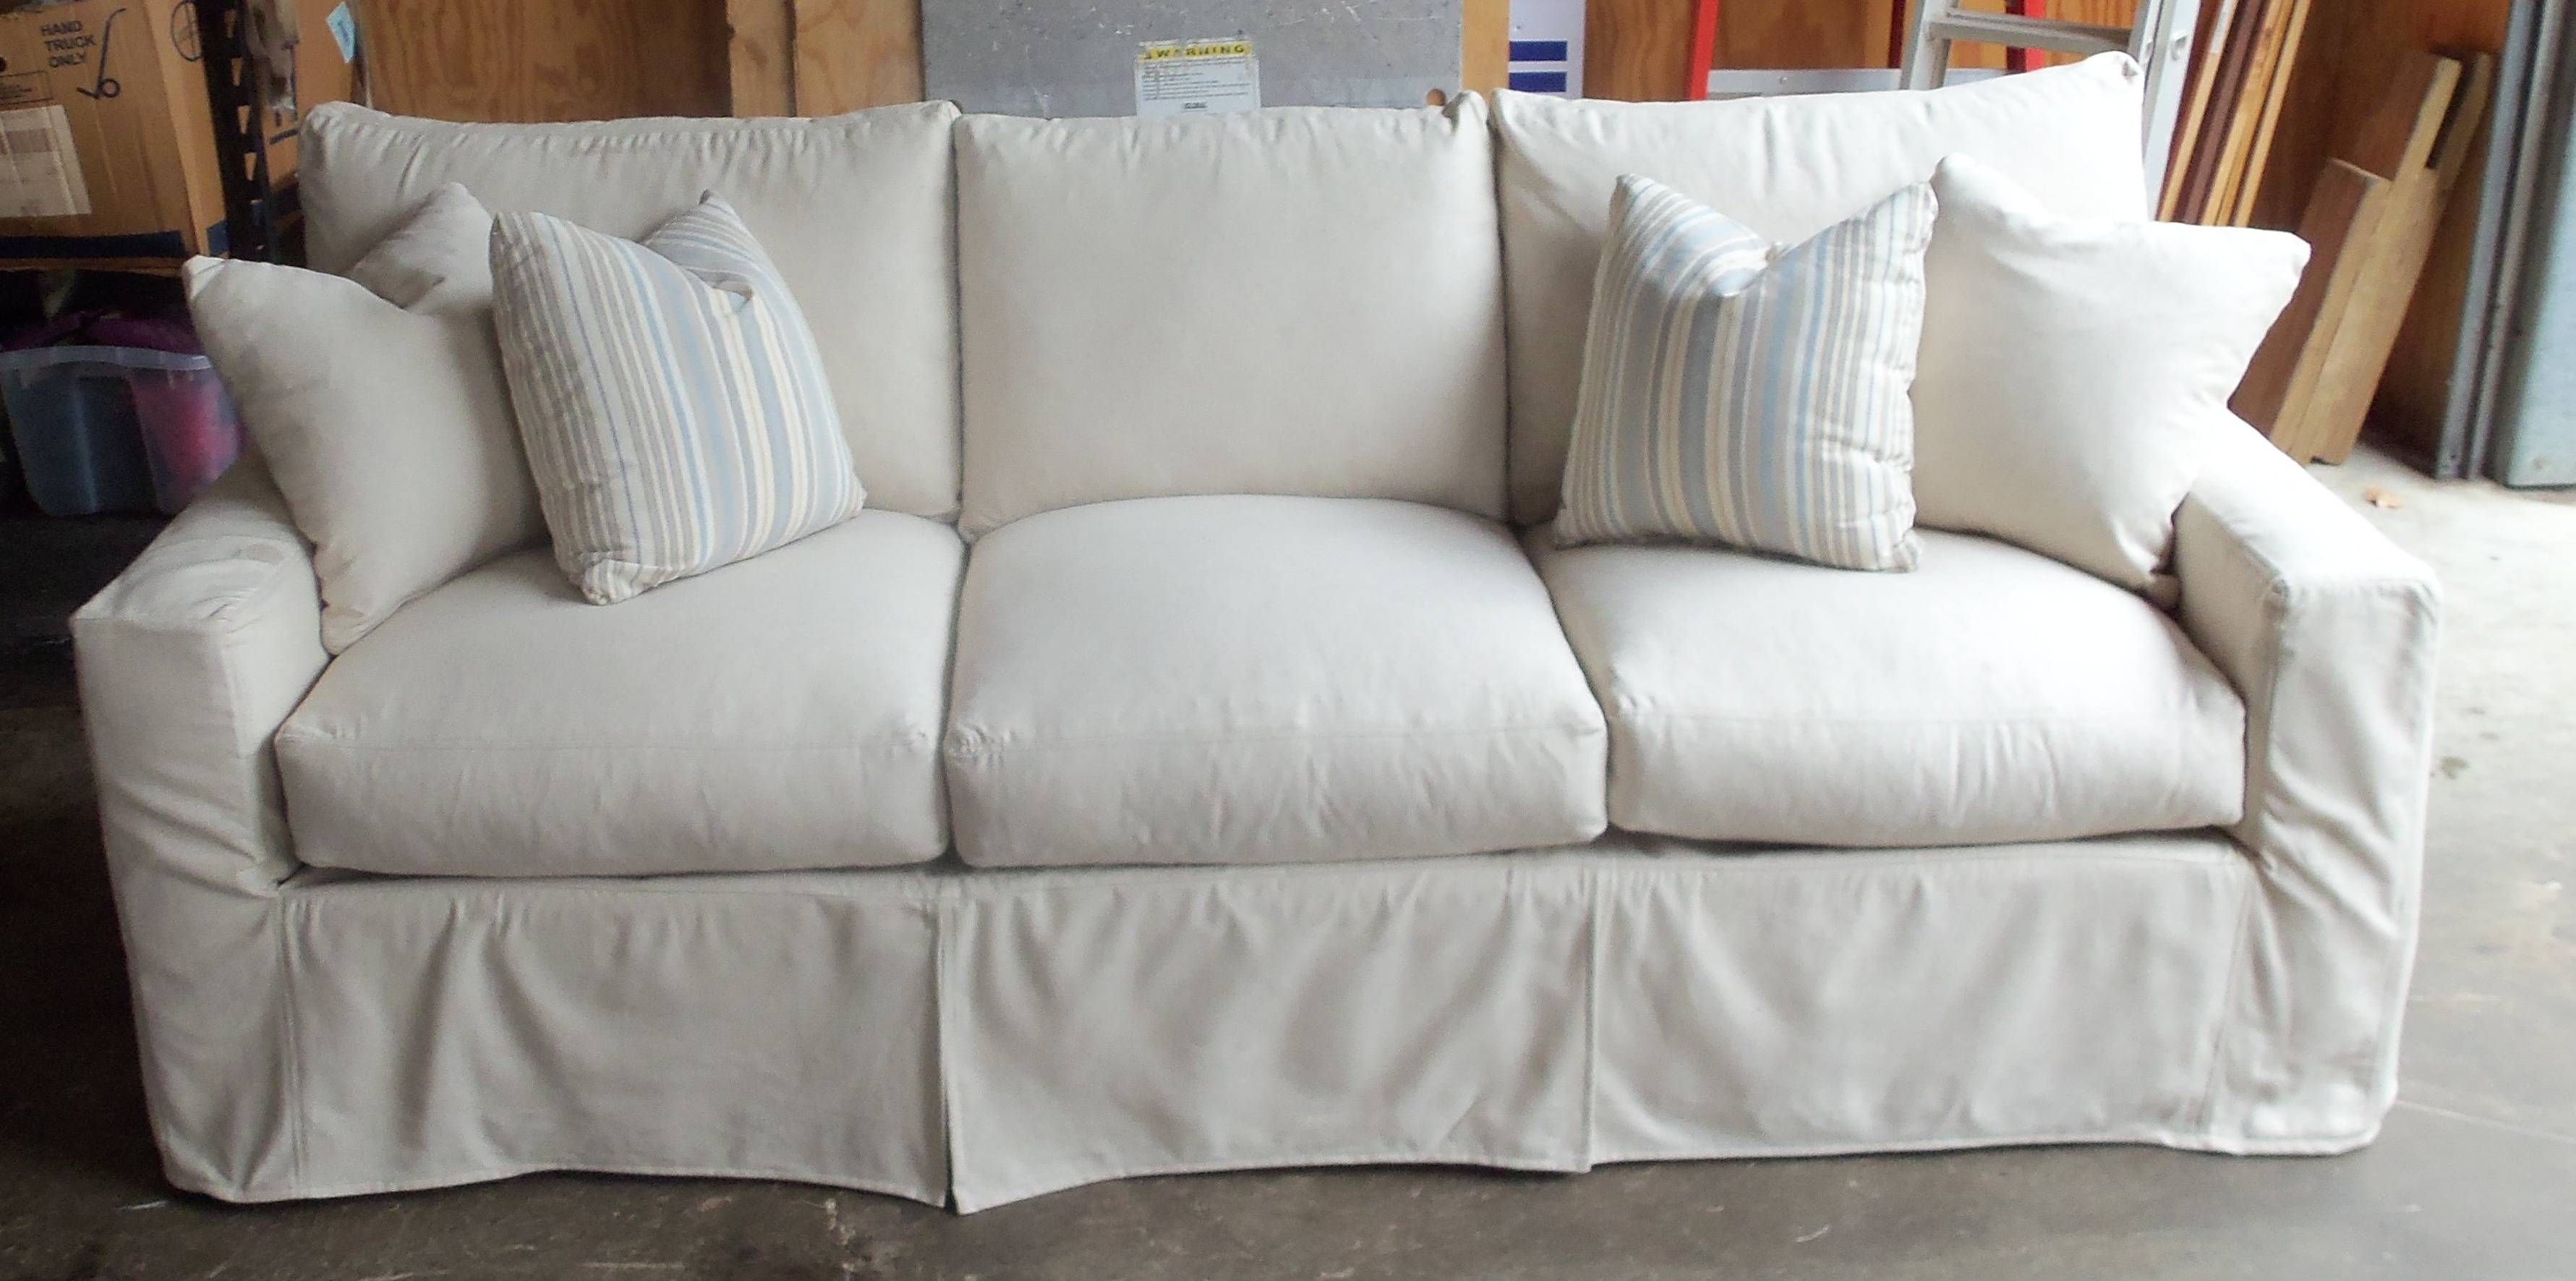 Sofas Center : White Slipcovers For Sofas With Cushions Cotton And For Canvas Slipcover Sofas (View 4 of 15)